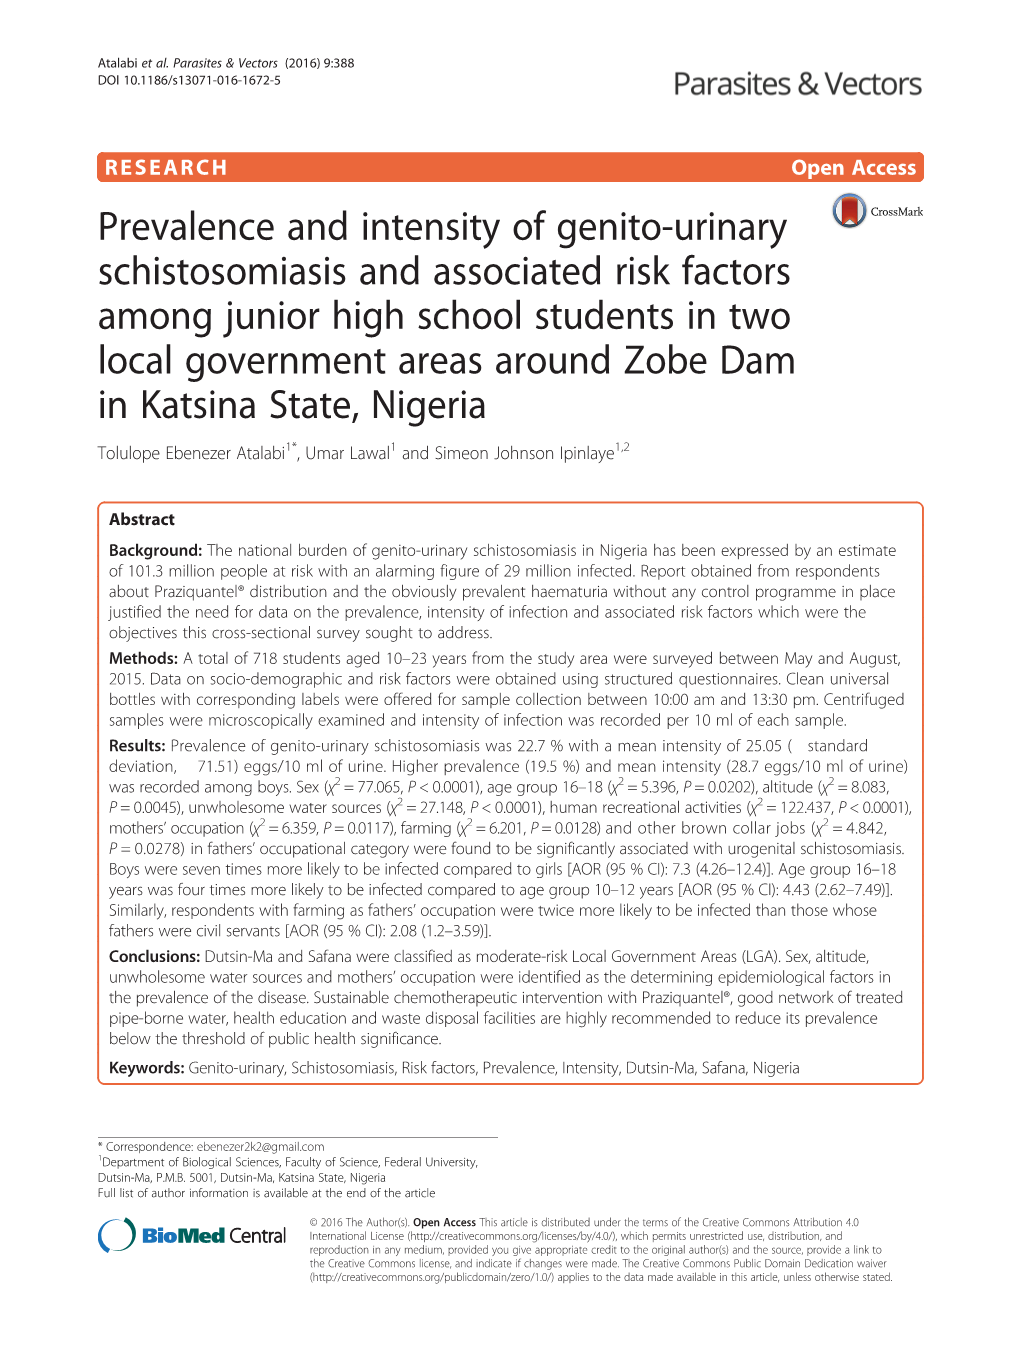 Prevalence and Intensity of Genito-Urinary Schistosomiasis And